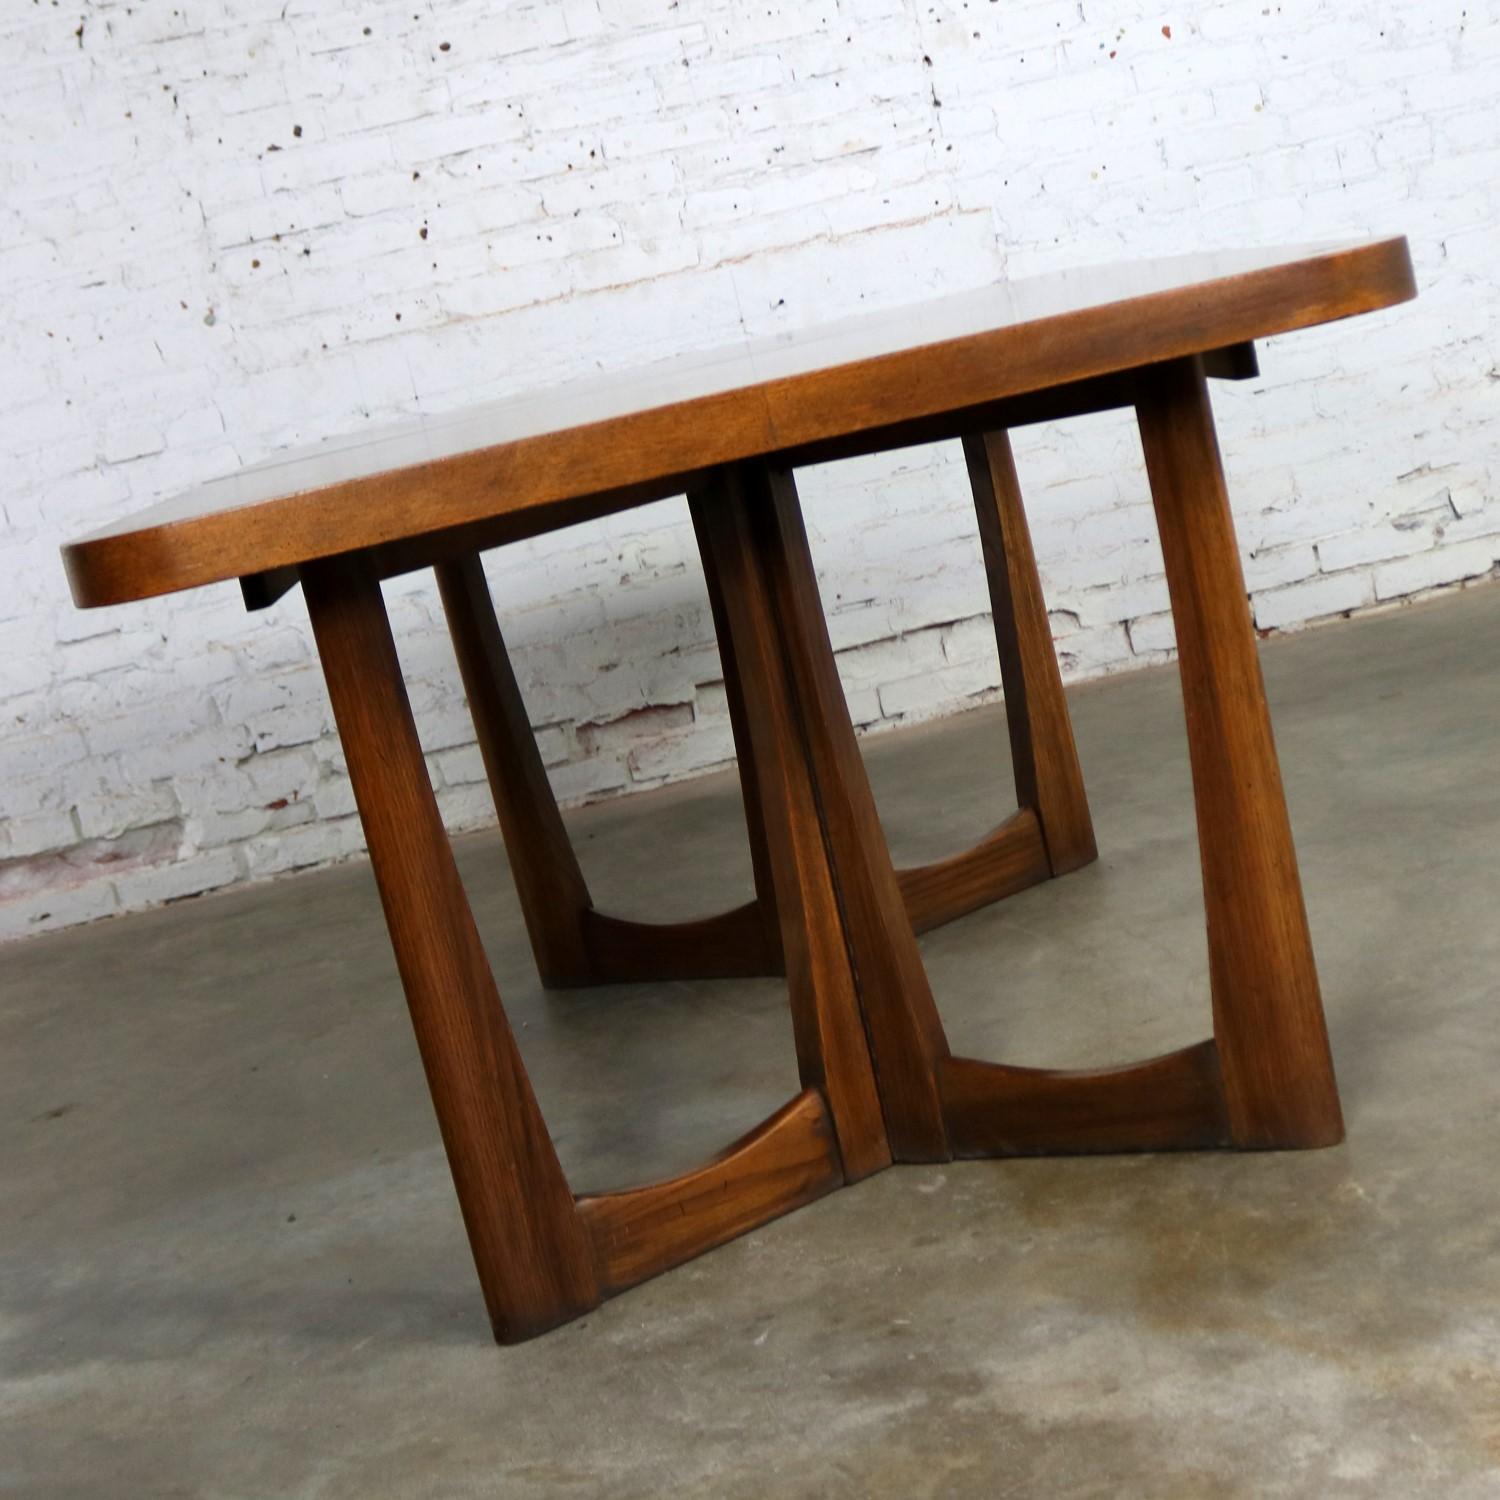 Handsome Mid-Century Modern oak veneer expanding dining table from Lane Alta Vista. It is in fabulous vintage condition. There were small spots to the finish on each of the four corners from having plastic dots which padded a glass top that was on